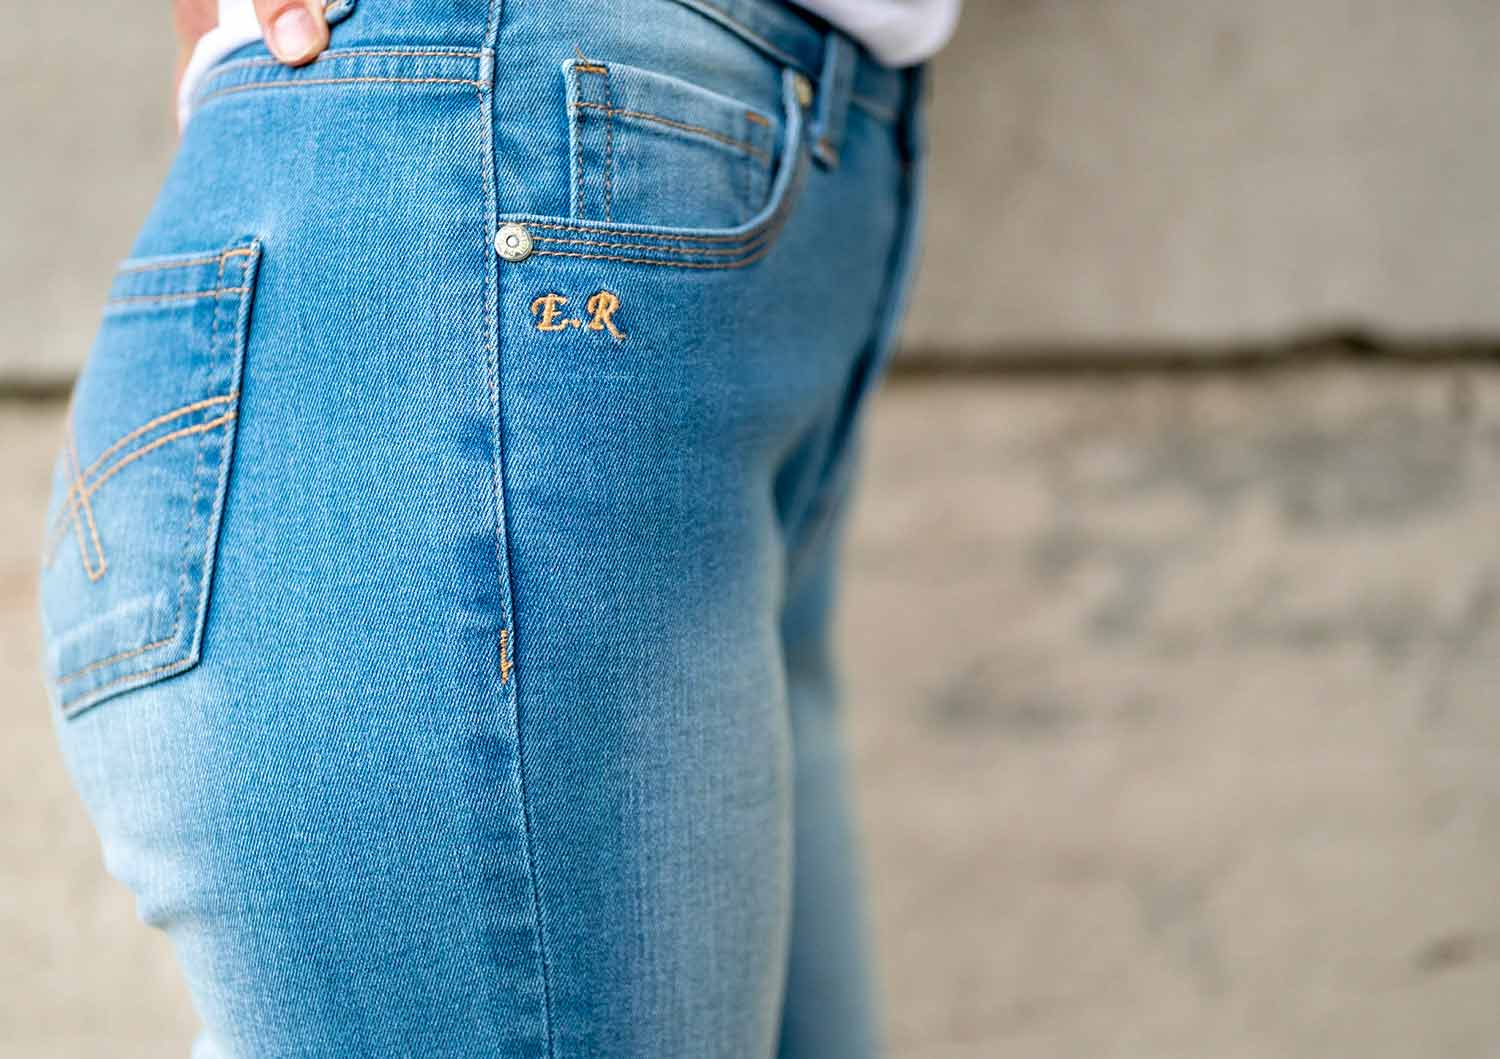 33 Of Our Favorite Ripped & Distressed Jeans + My Genius 